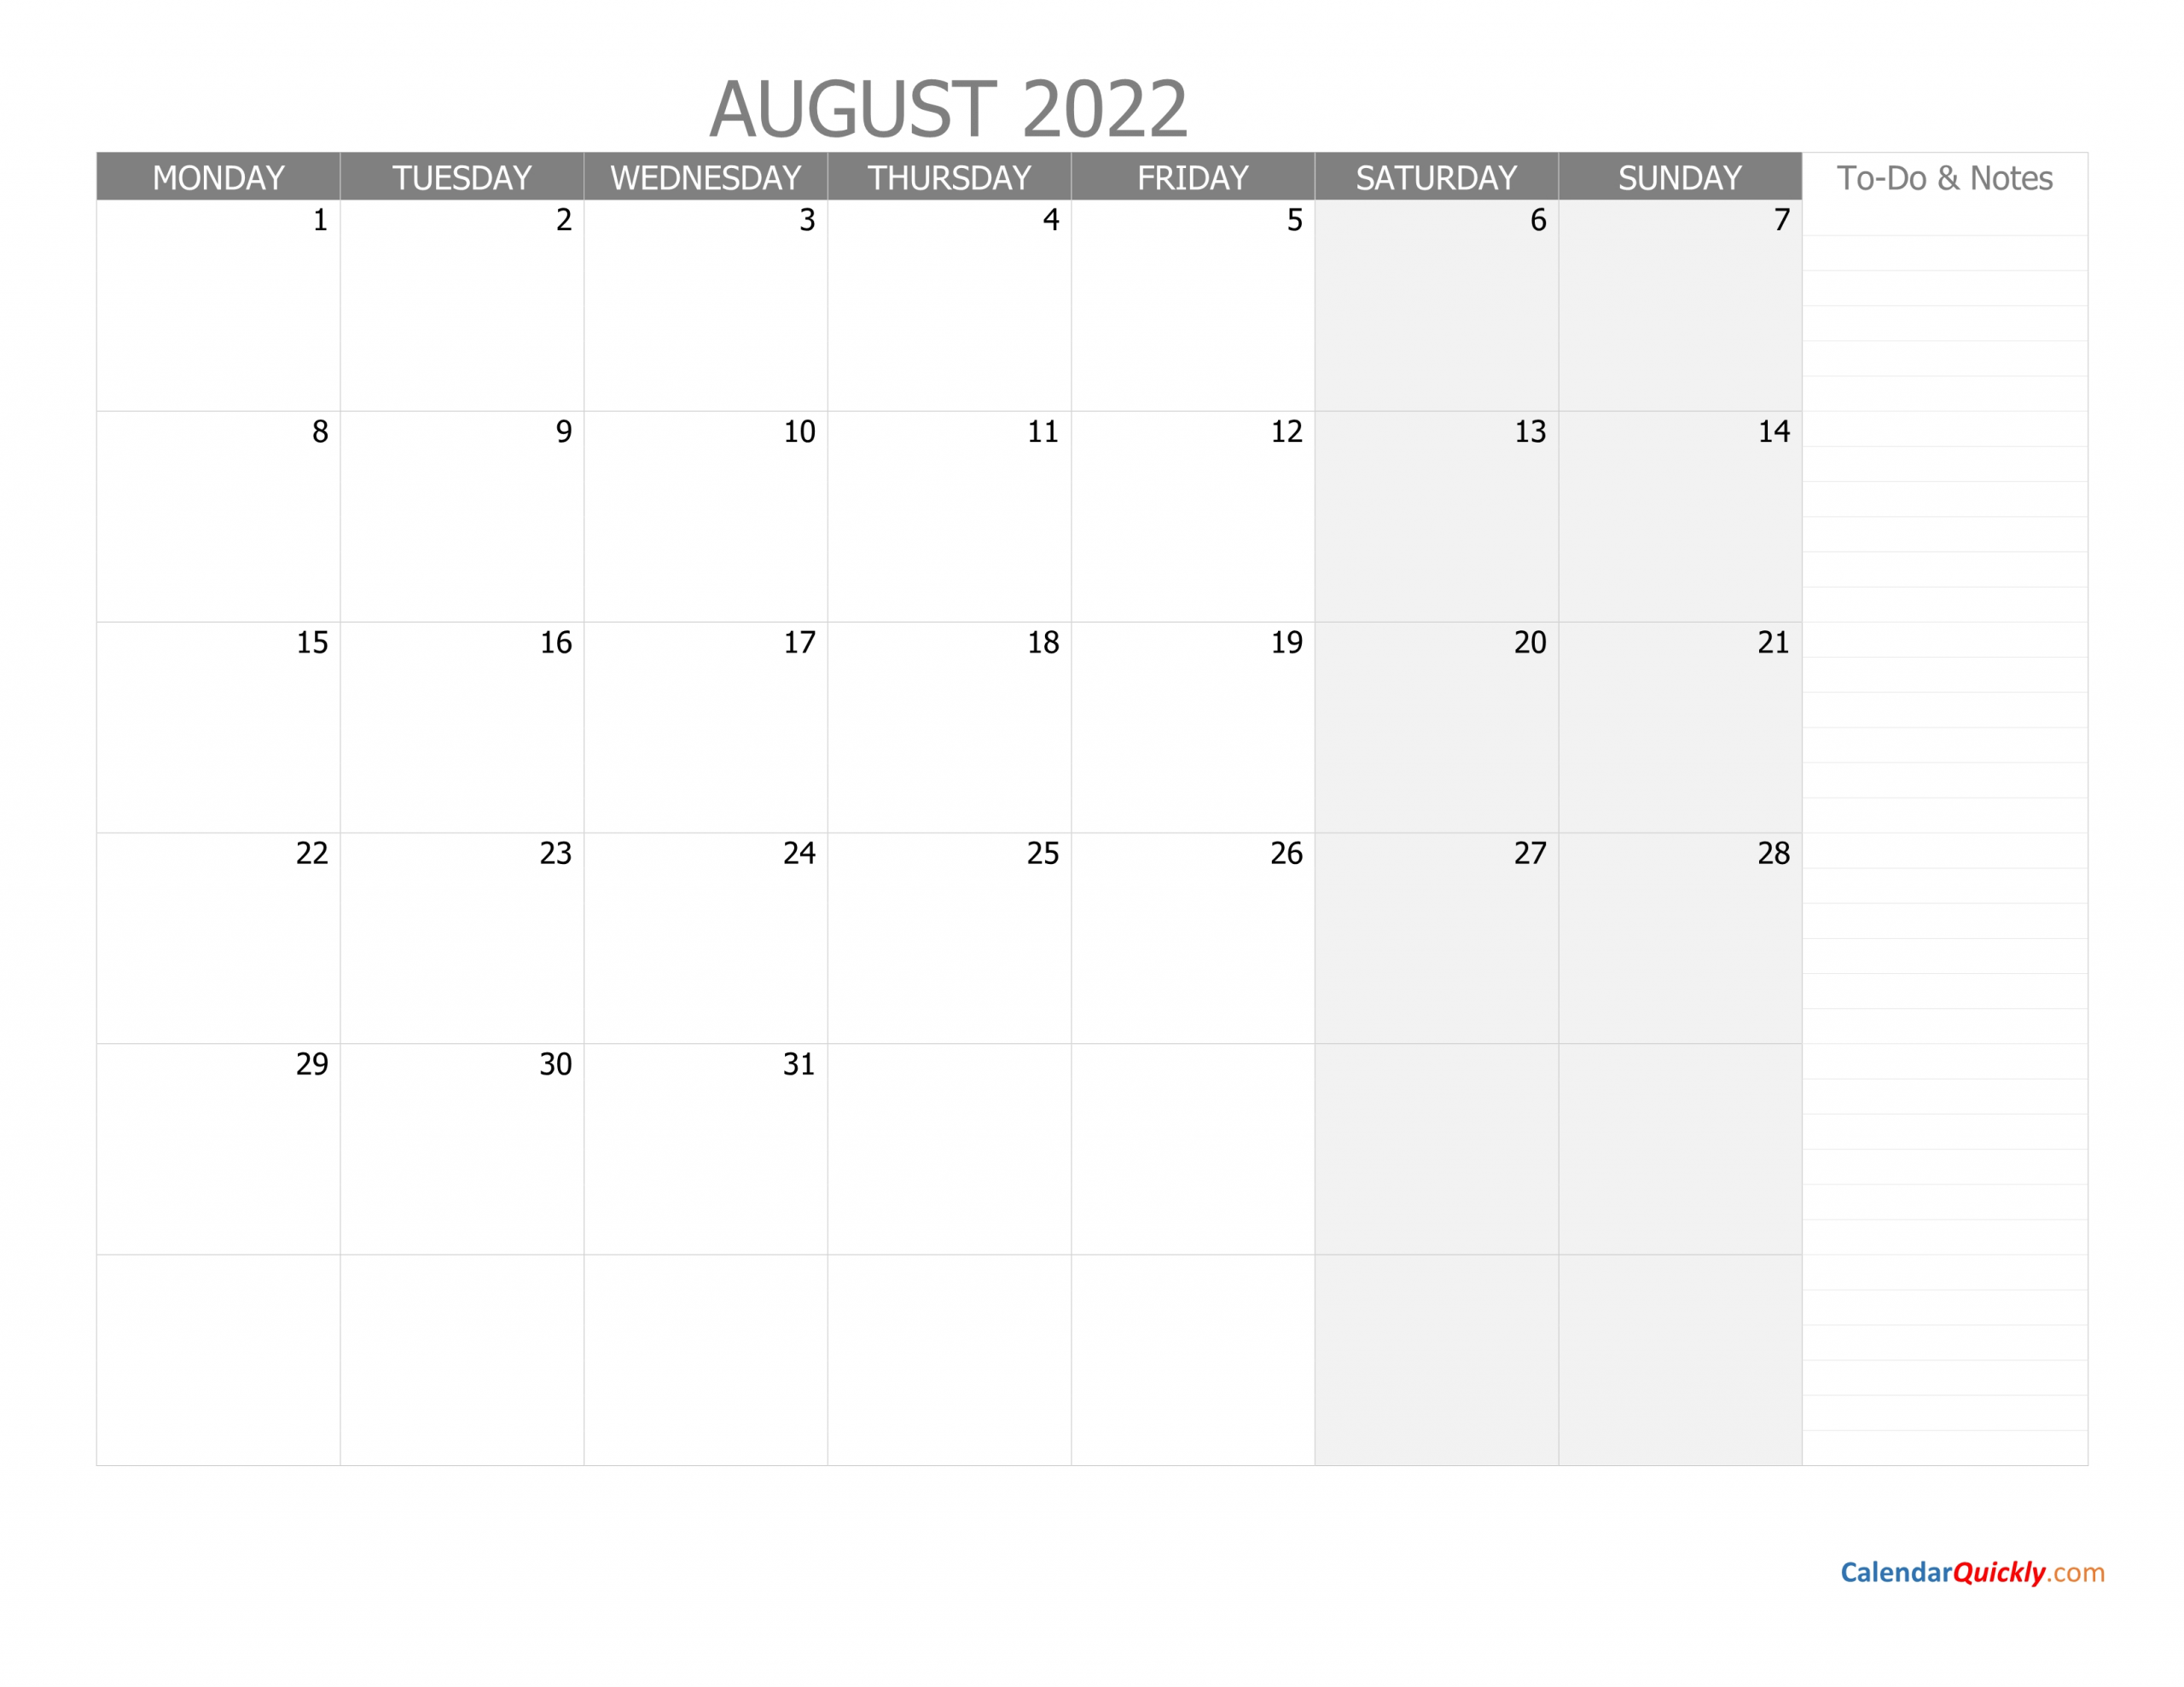 August Monday Calendar 2022 With Notes | Calendar Quickly